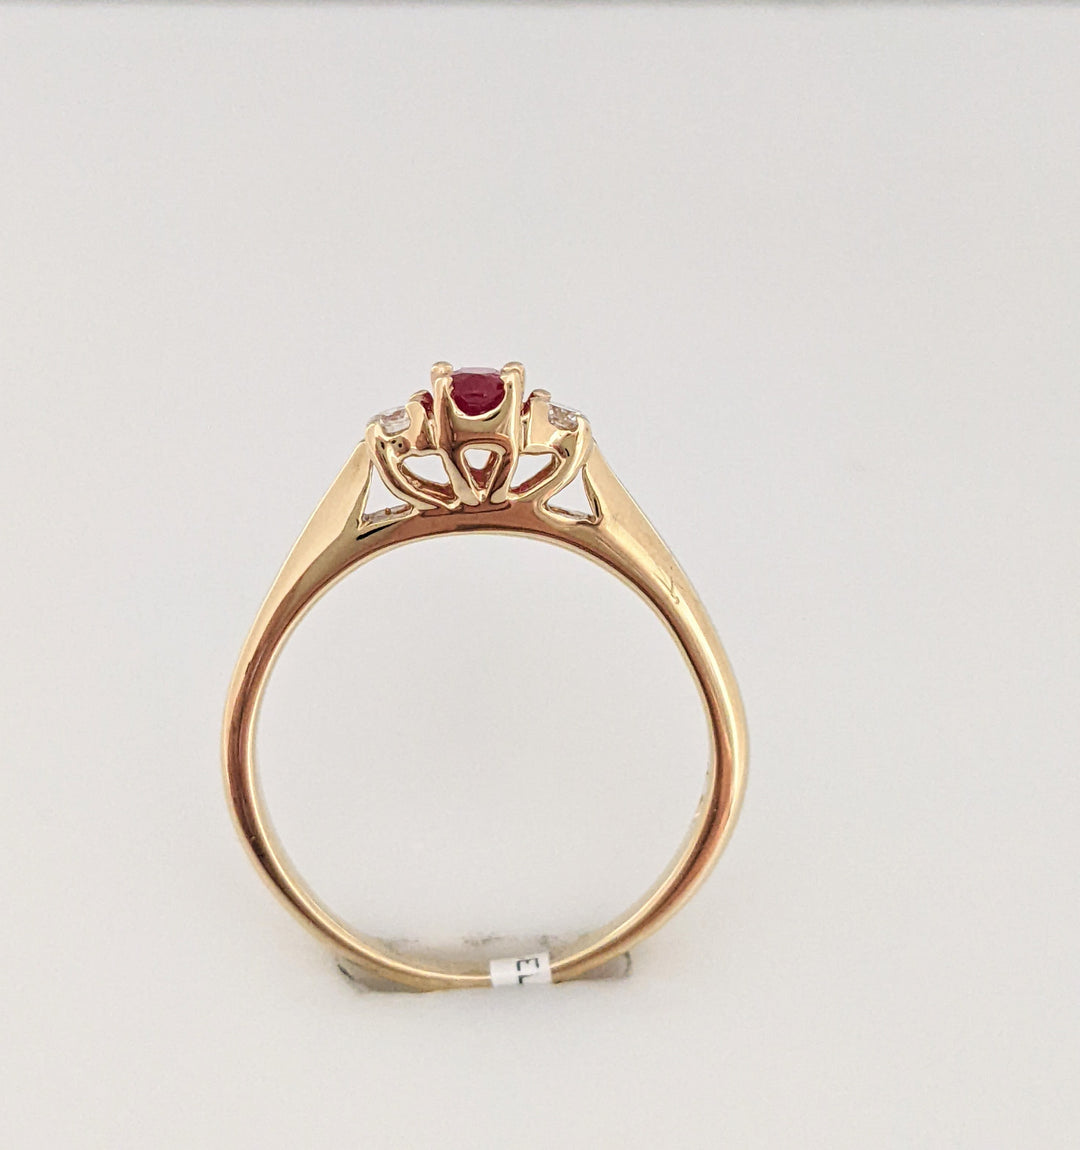 14K RUBY OVAL 3X5 WITH (2) DIAMONDS ESTATE RING 2.7 GRAMS